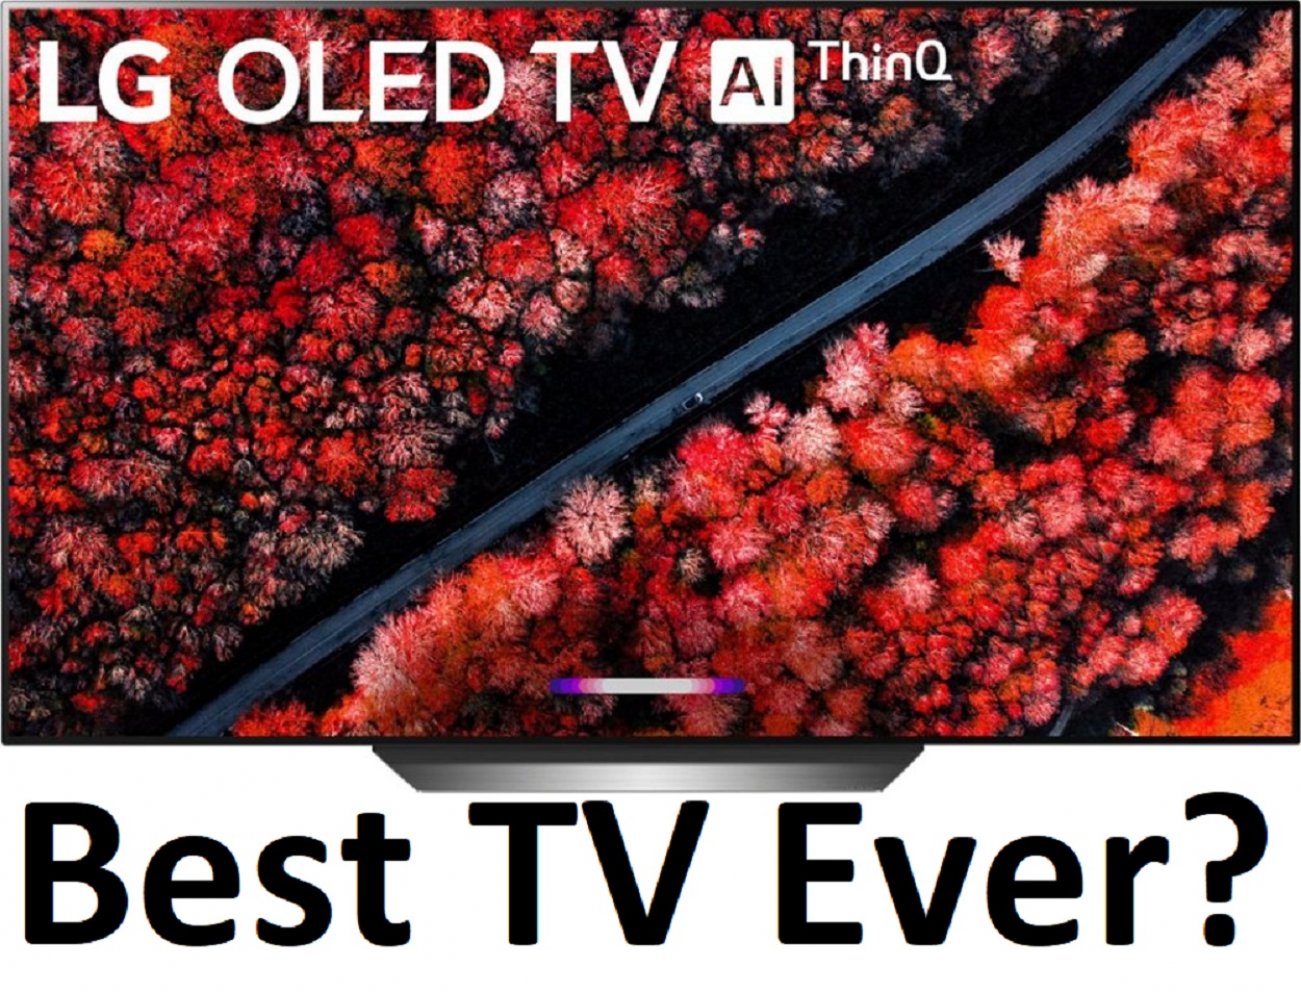 LG’s 77-inch OLED Simply Can't Be Beat. Period. (If You Can Afford It)